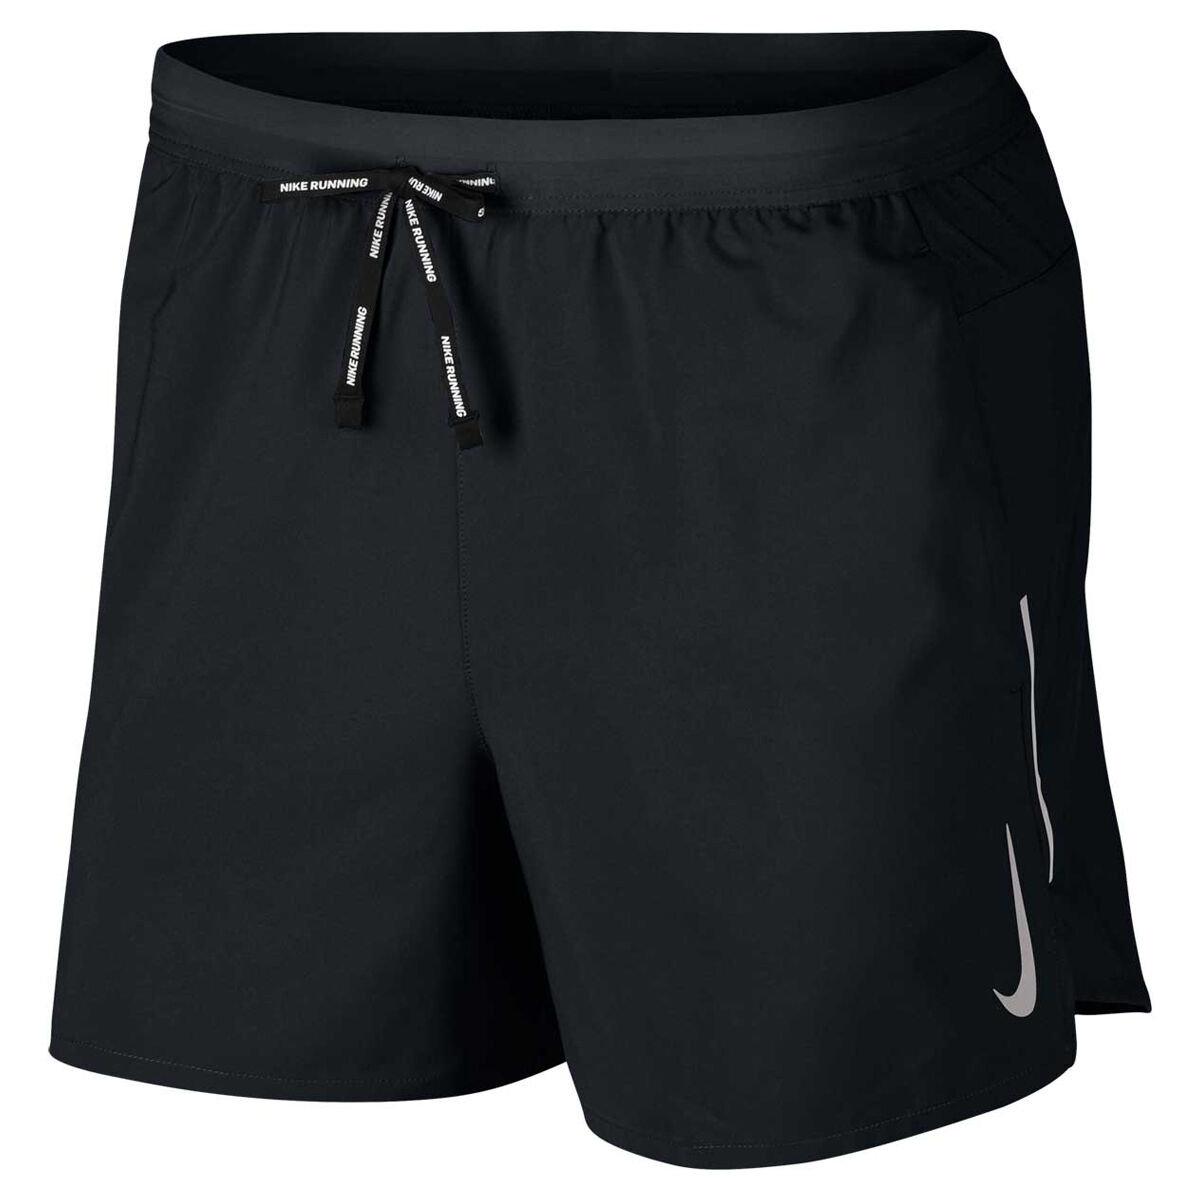 nike compression shorts with phone pocket